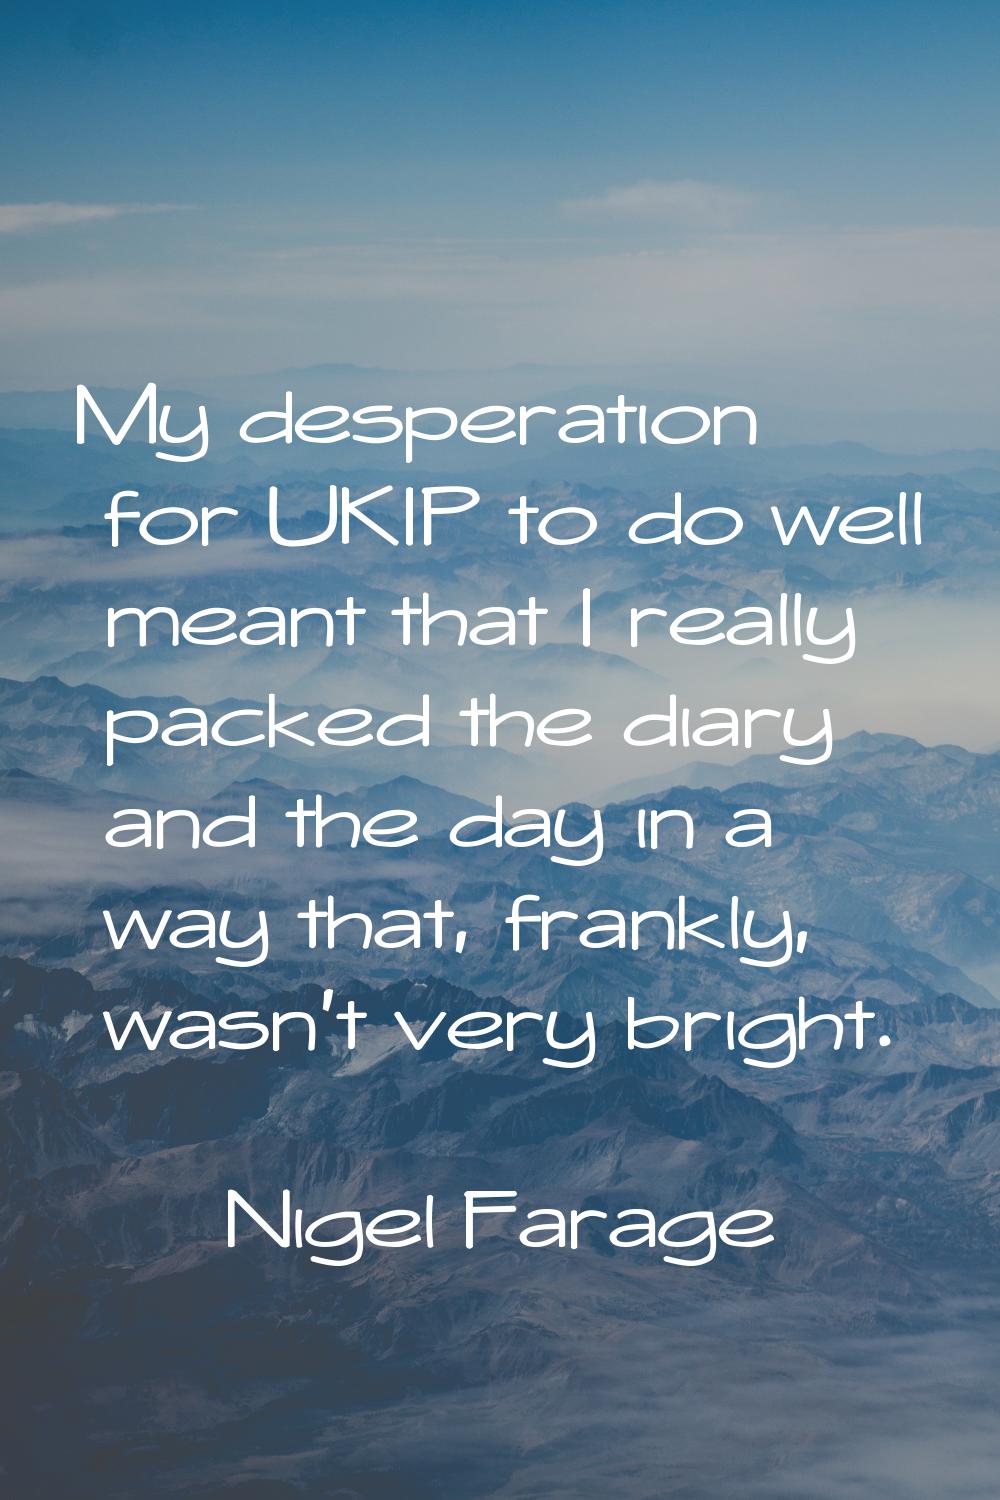 My desperation for UKIP to do well meant that I really packed the diary and the day in a way that, 